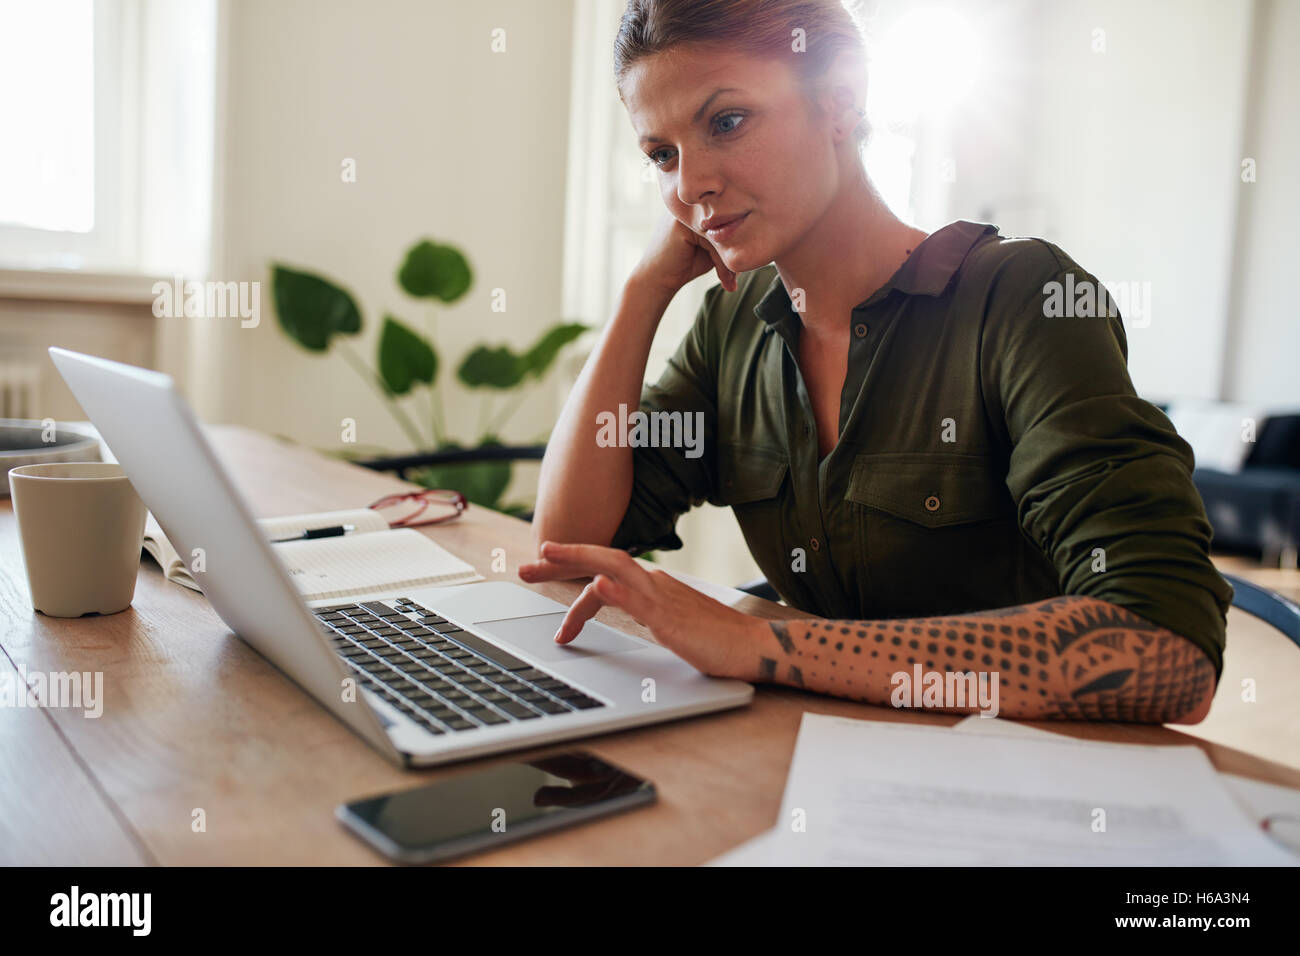 Shot of beautiful young woman working from home using laptop. Female sitting at table and surfing internet on laptop computer. Stock Photo